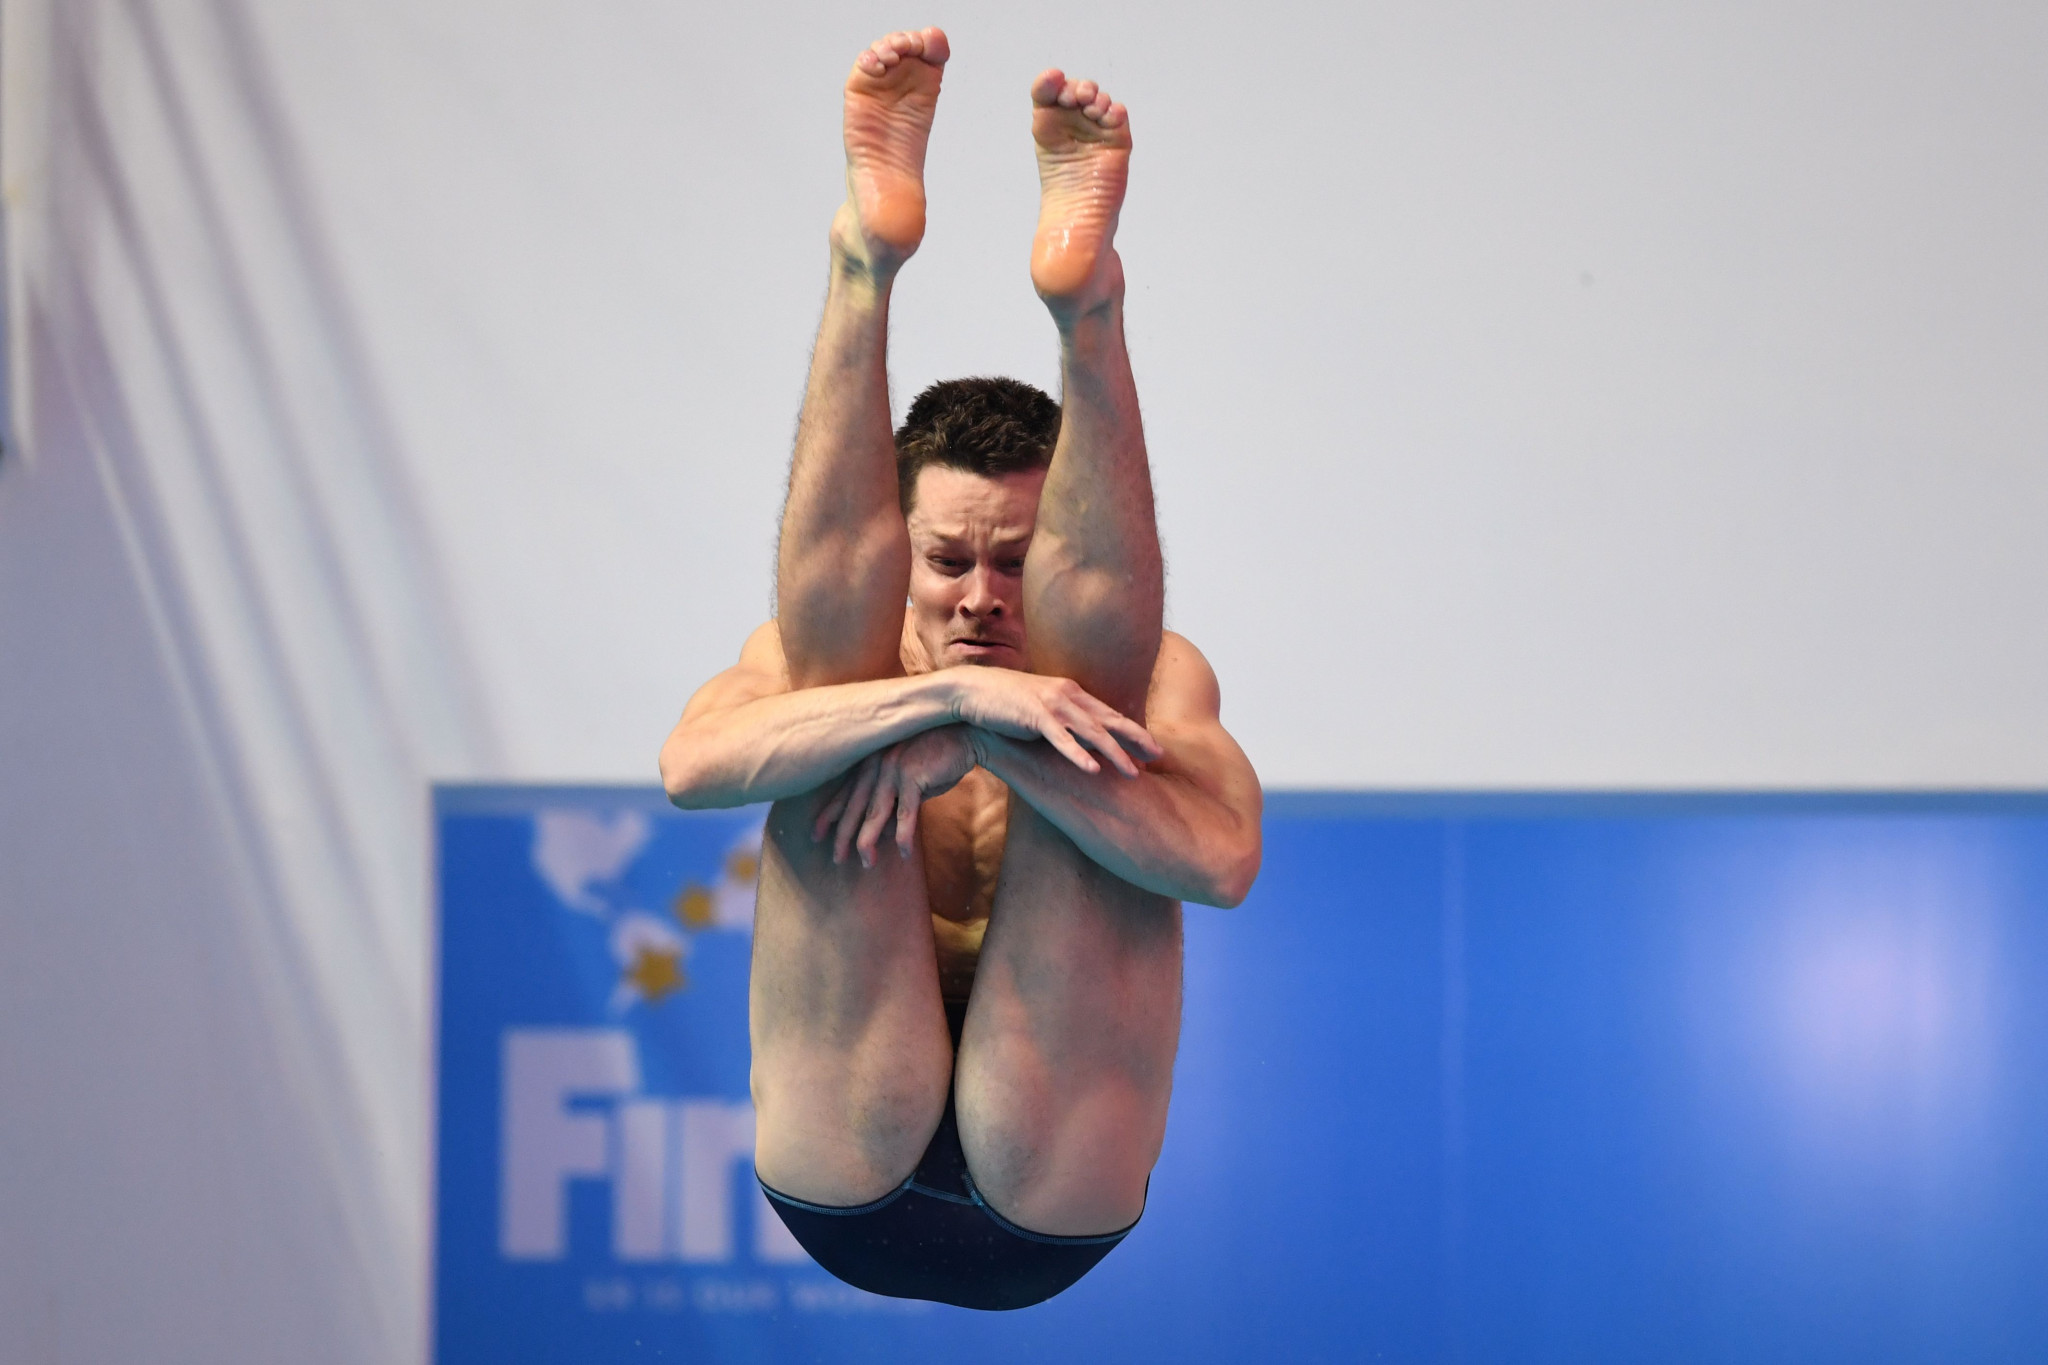 Germany claim first gold medal of LEN European Diving Championships